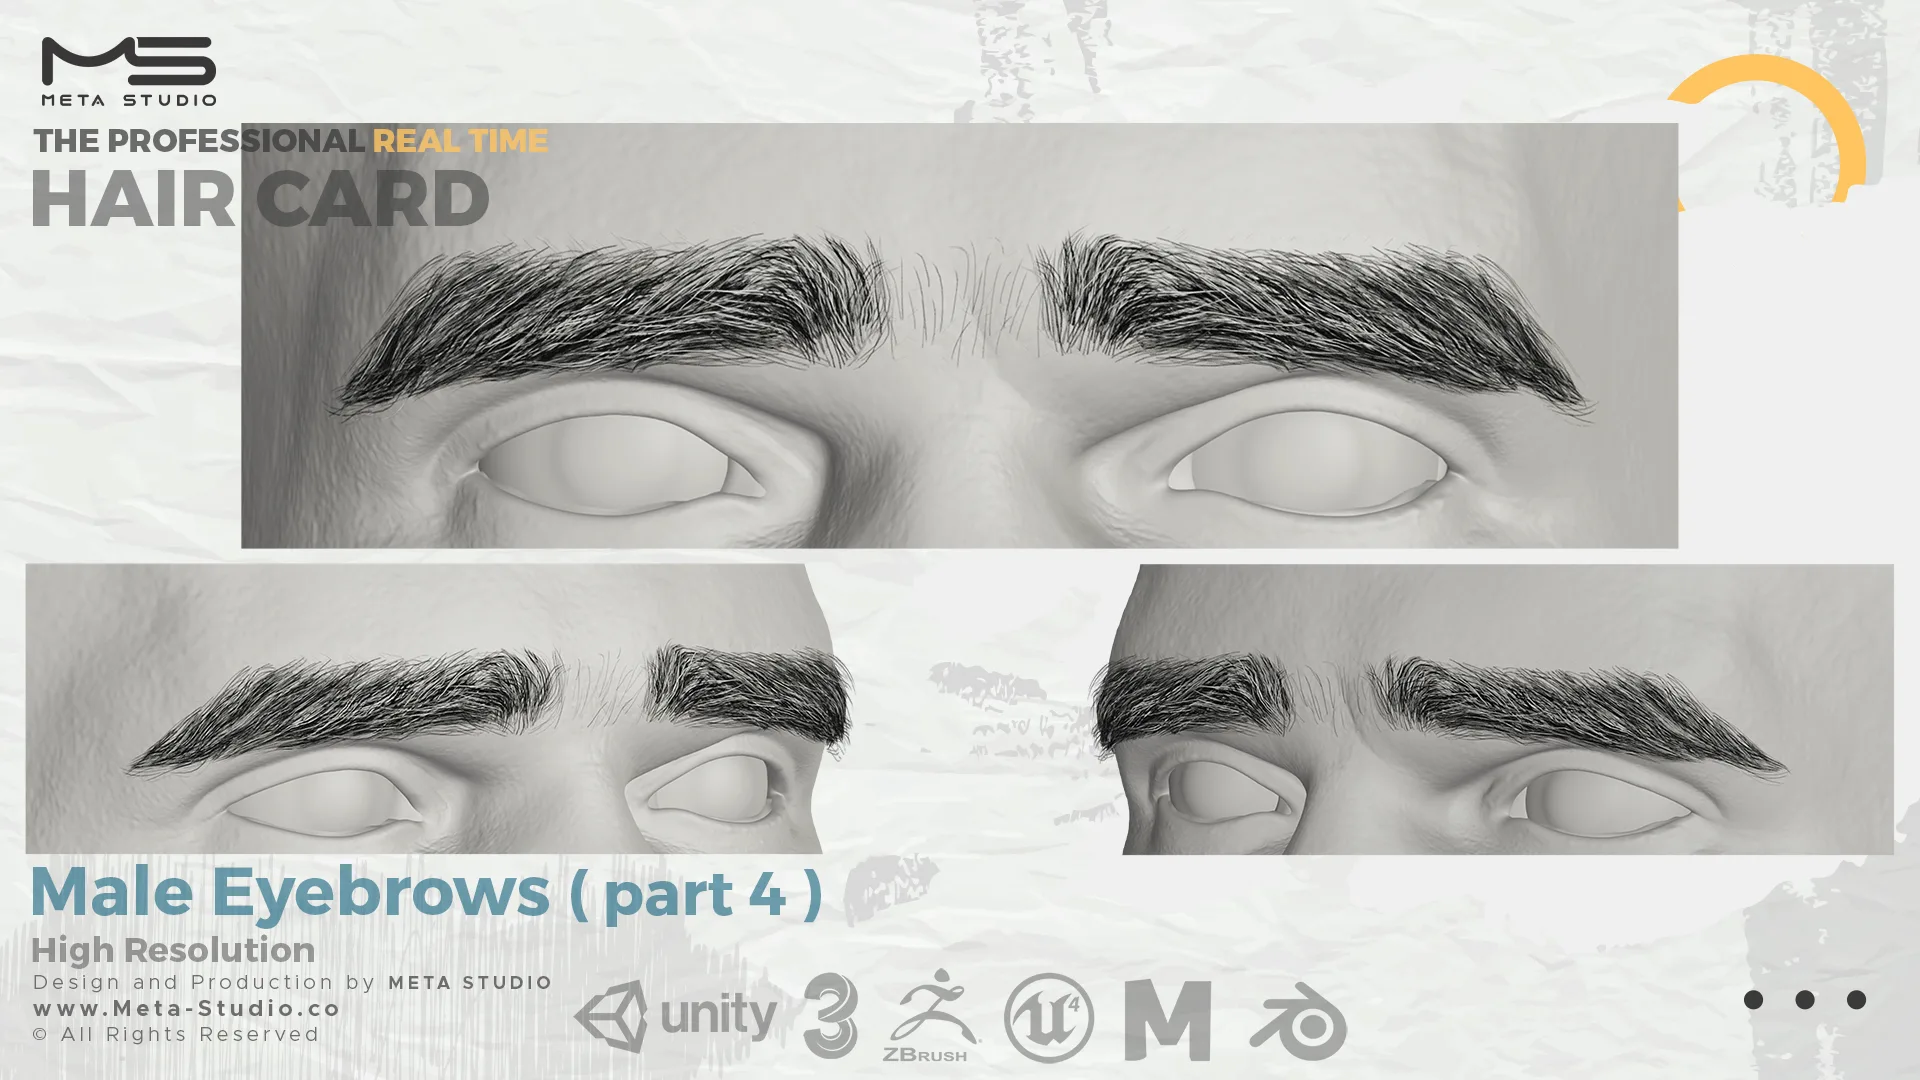 Male Eyebrows Part 4 - Professional Realtime Hair card